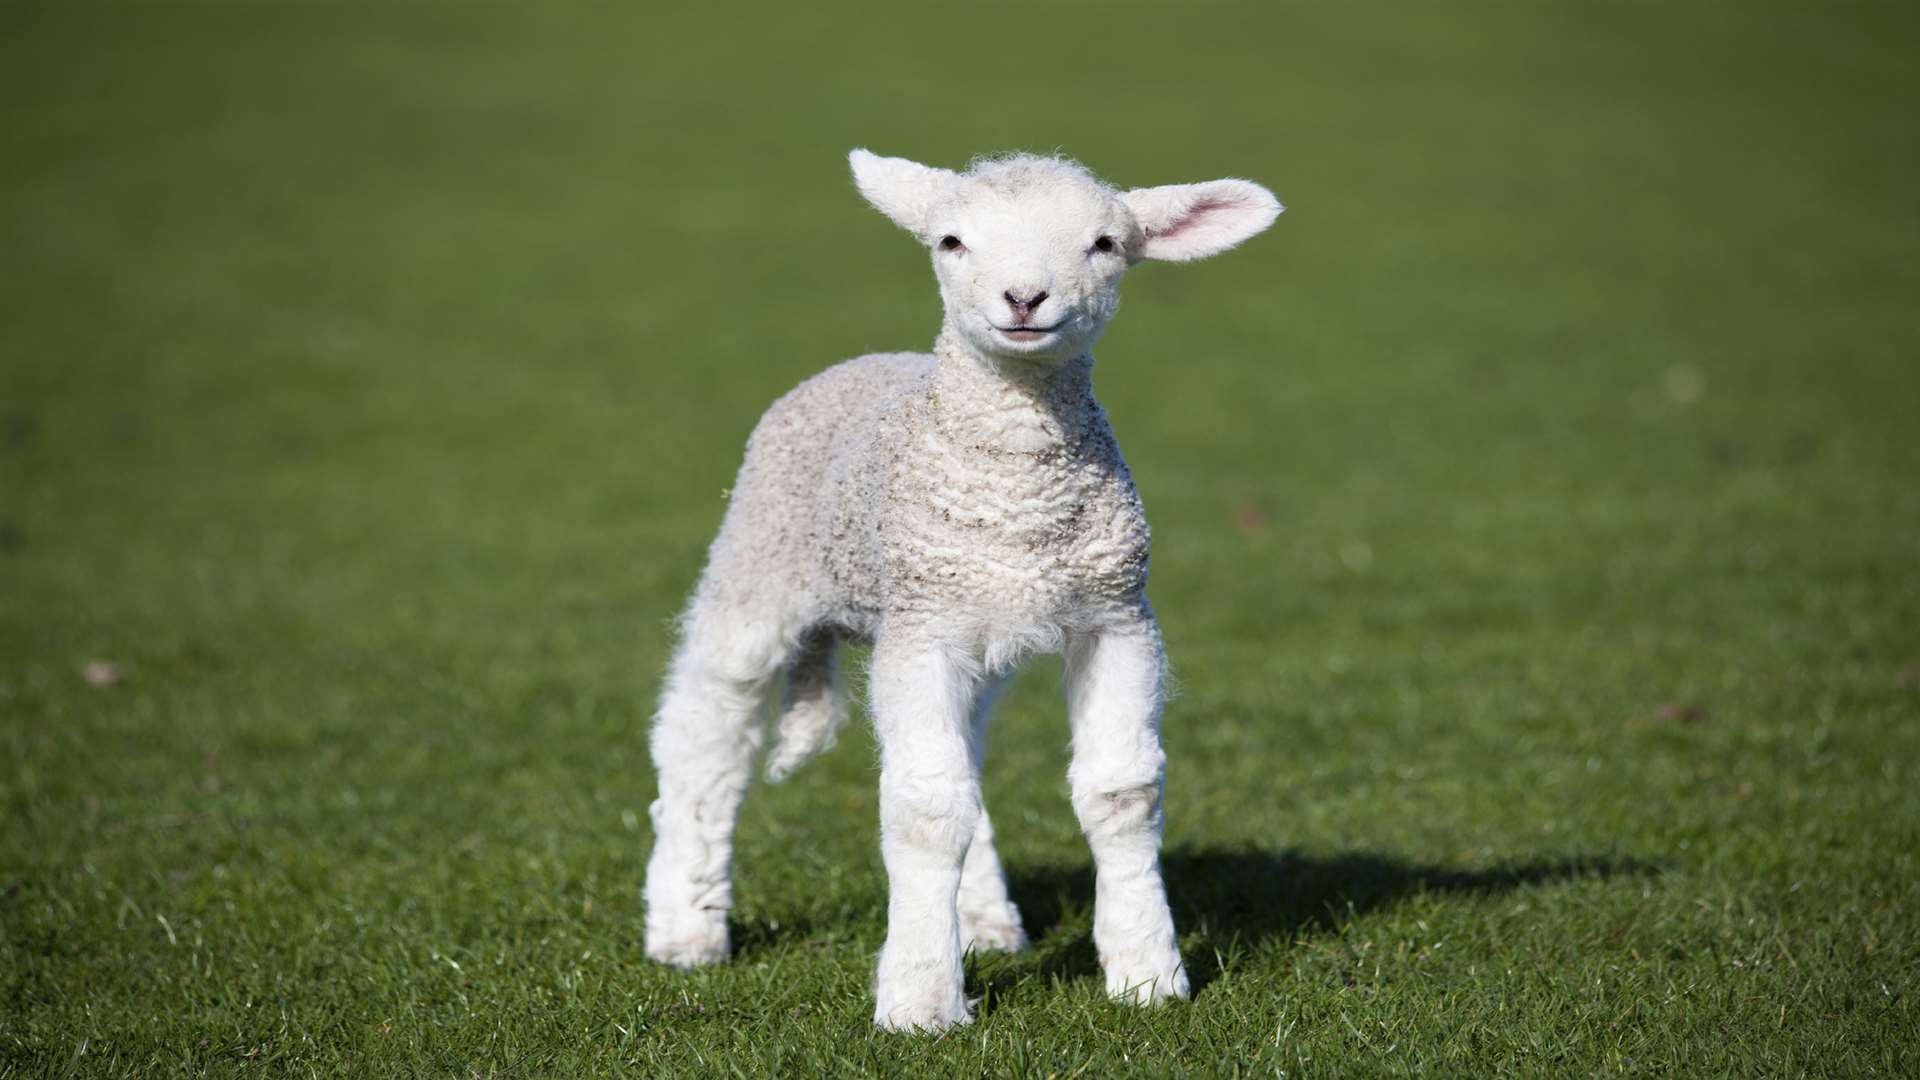 Surrey Police is appealing for the public to help find the lamb slasher that has killed three in the past month